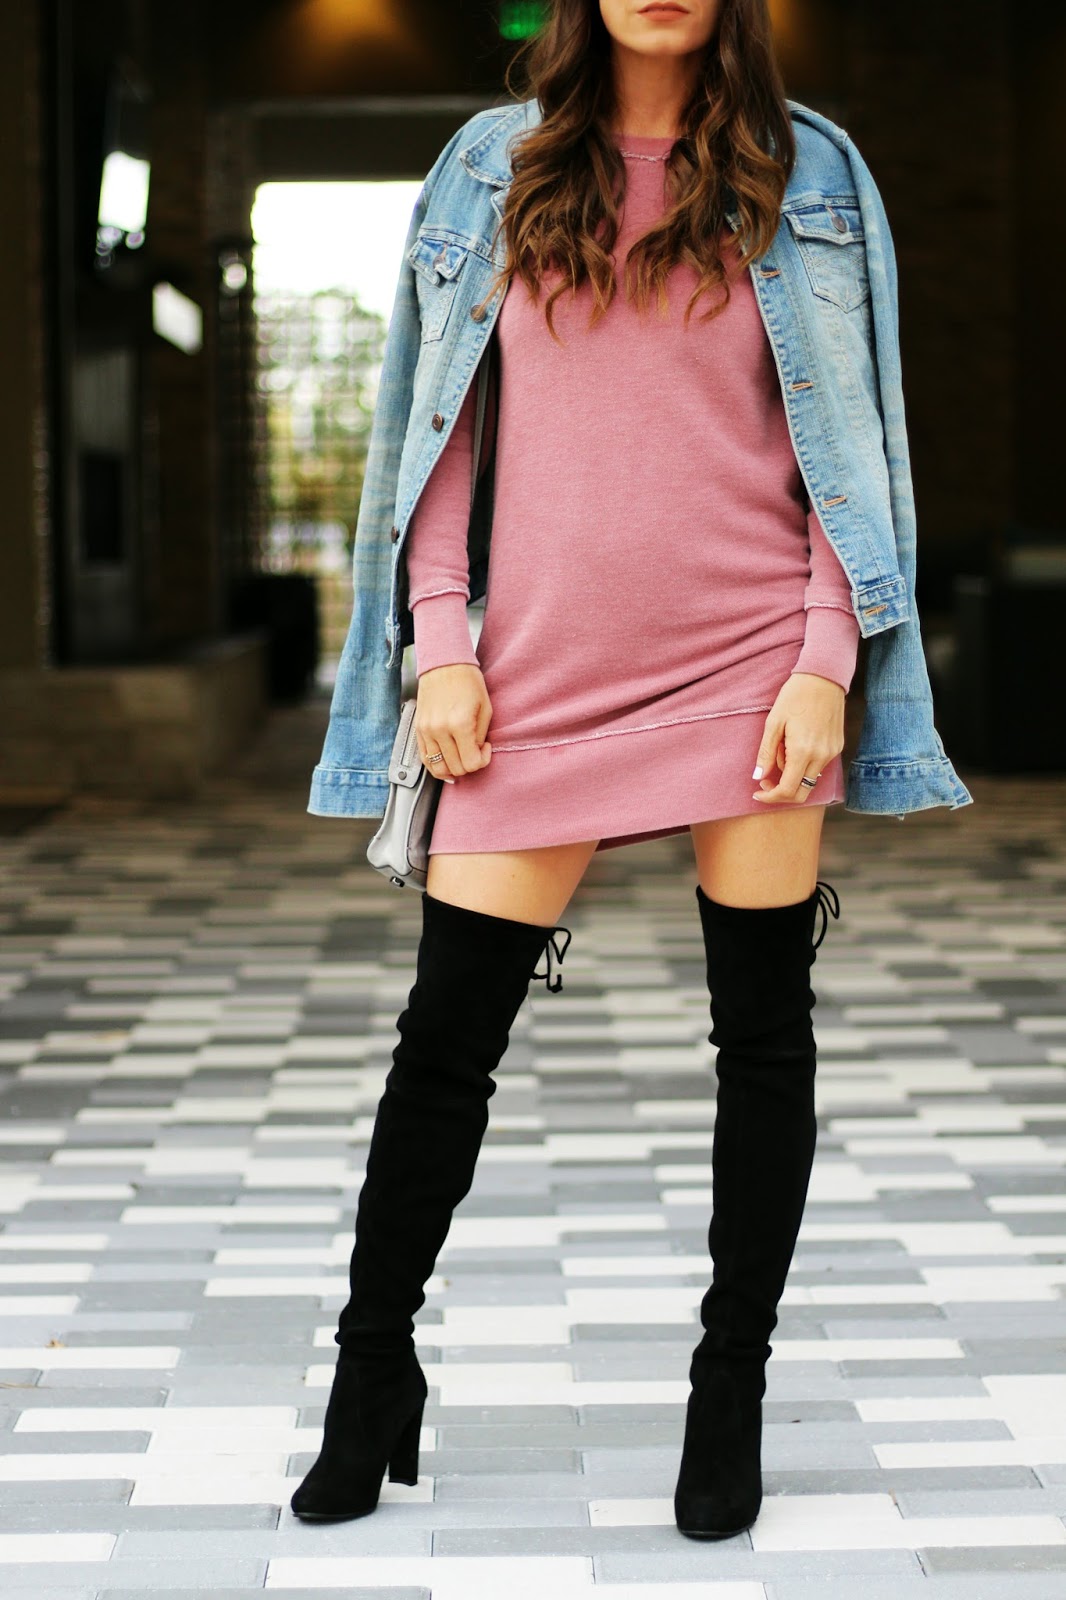 Sweatshirt dress with over the knee boots